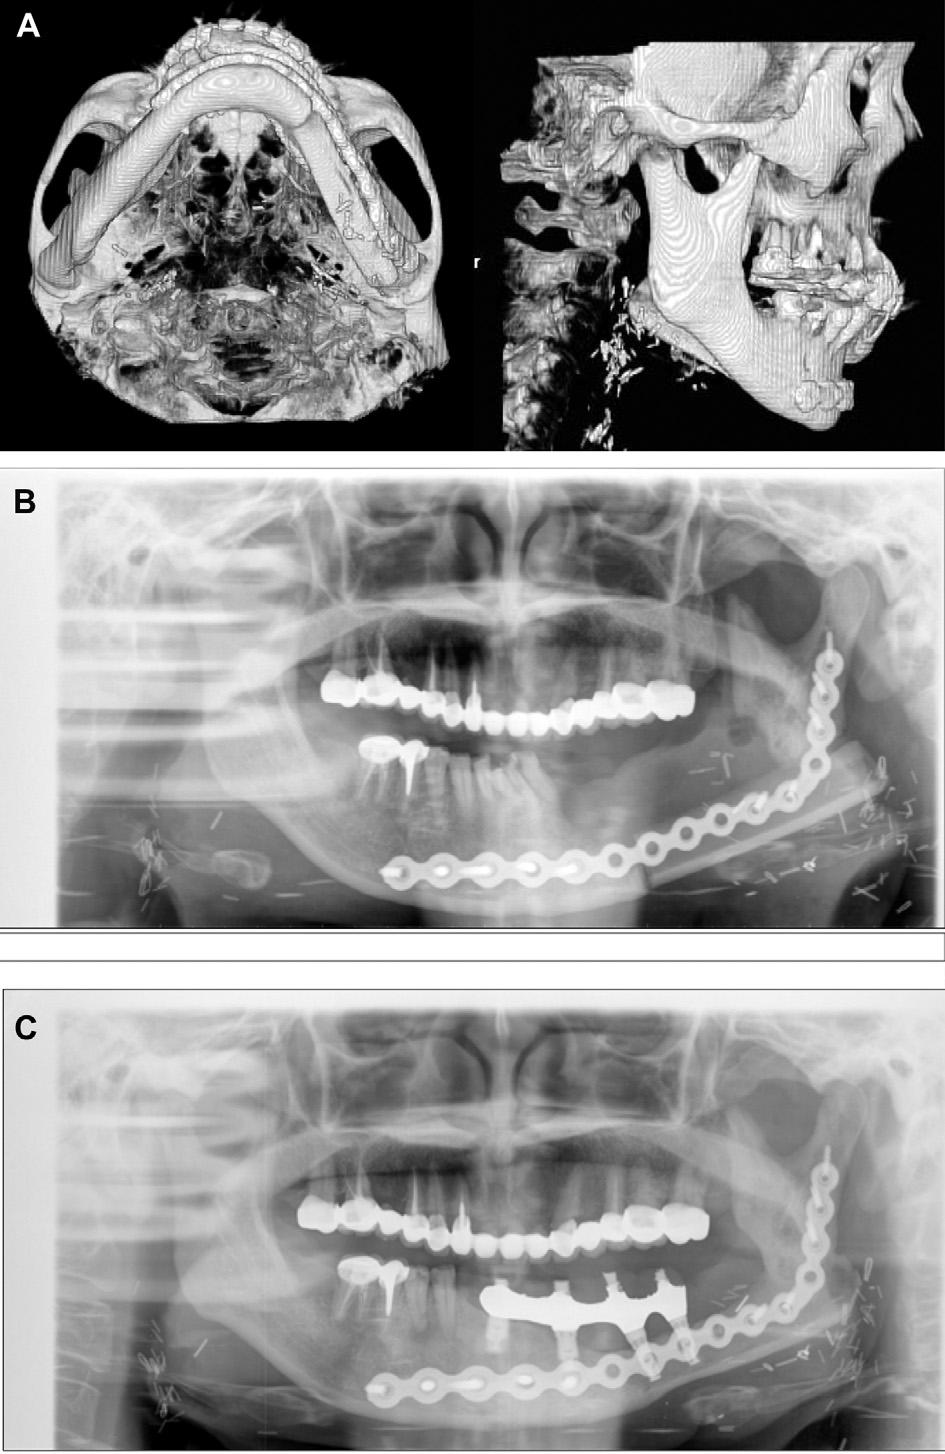 304 T.-M. Wang et al those on the STL model, the pre-adapted plate could be fixed on the mandibular segments and the mandibular continuity reestablished as planned.